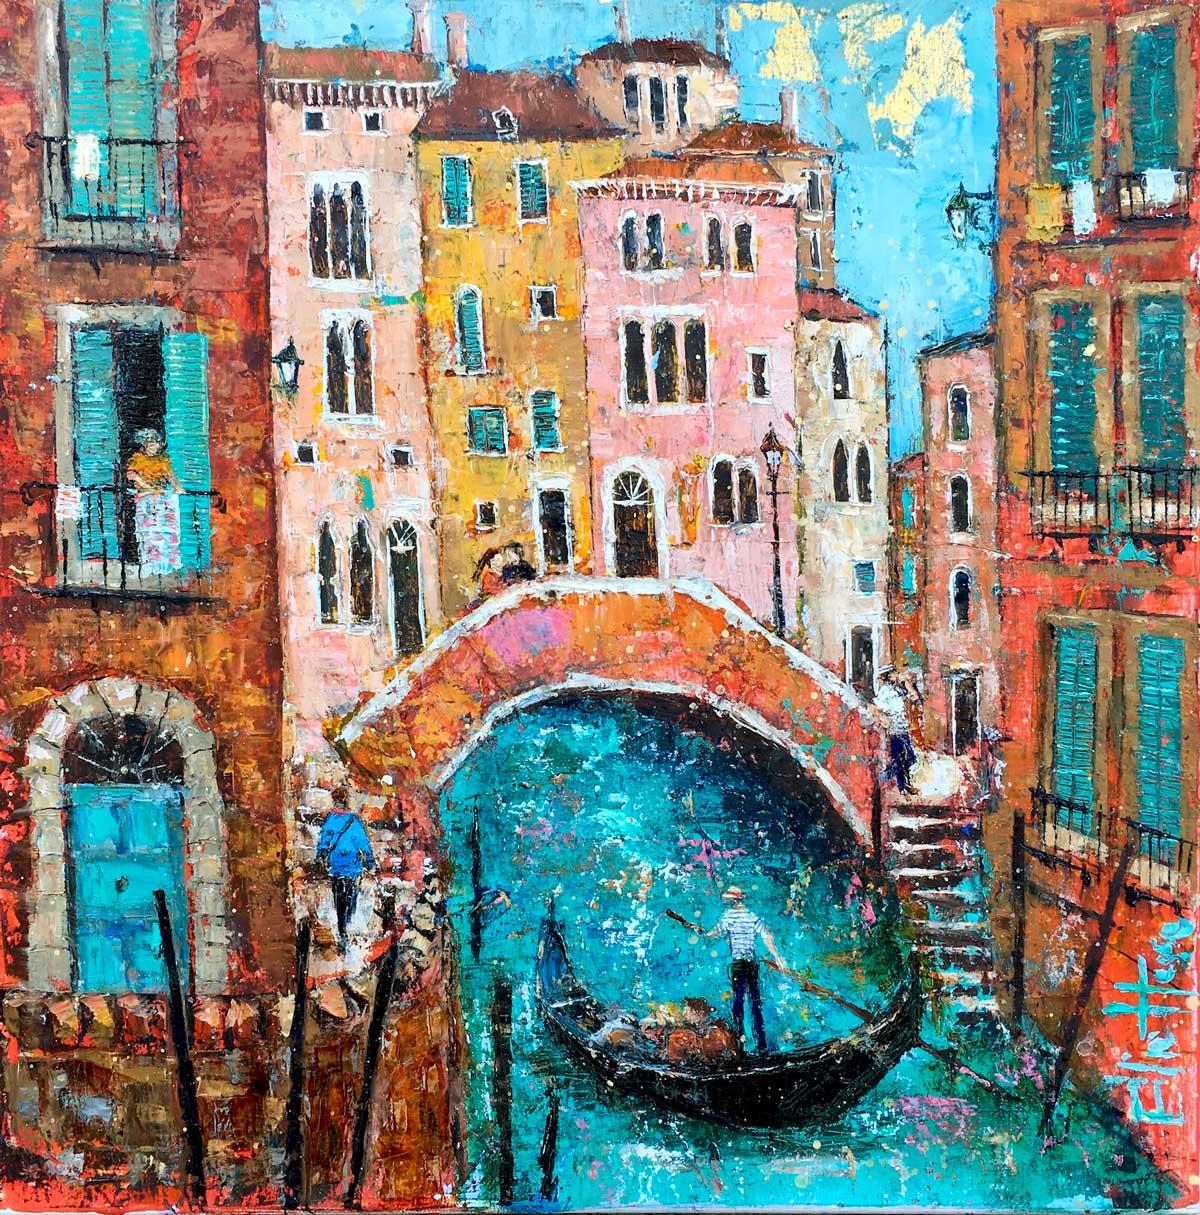 Gondolier, Venice - contemporary landscape colourful mixed media painting